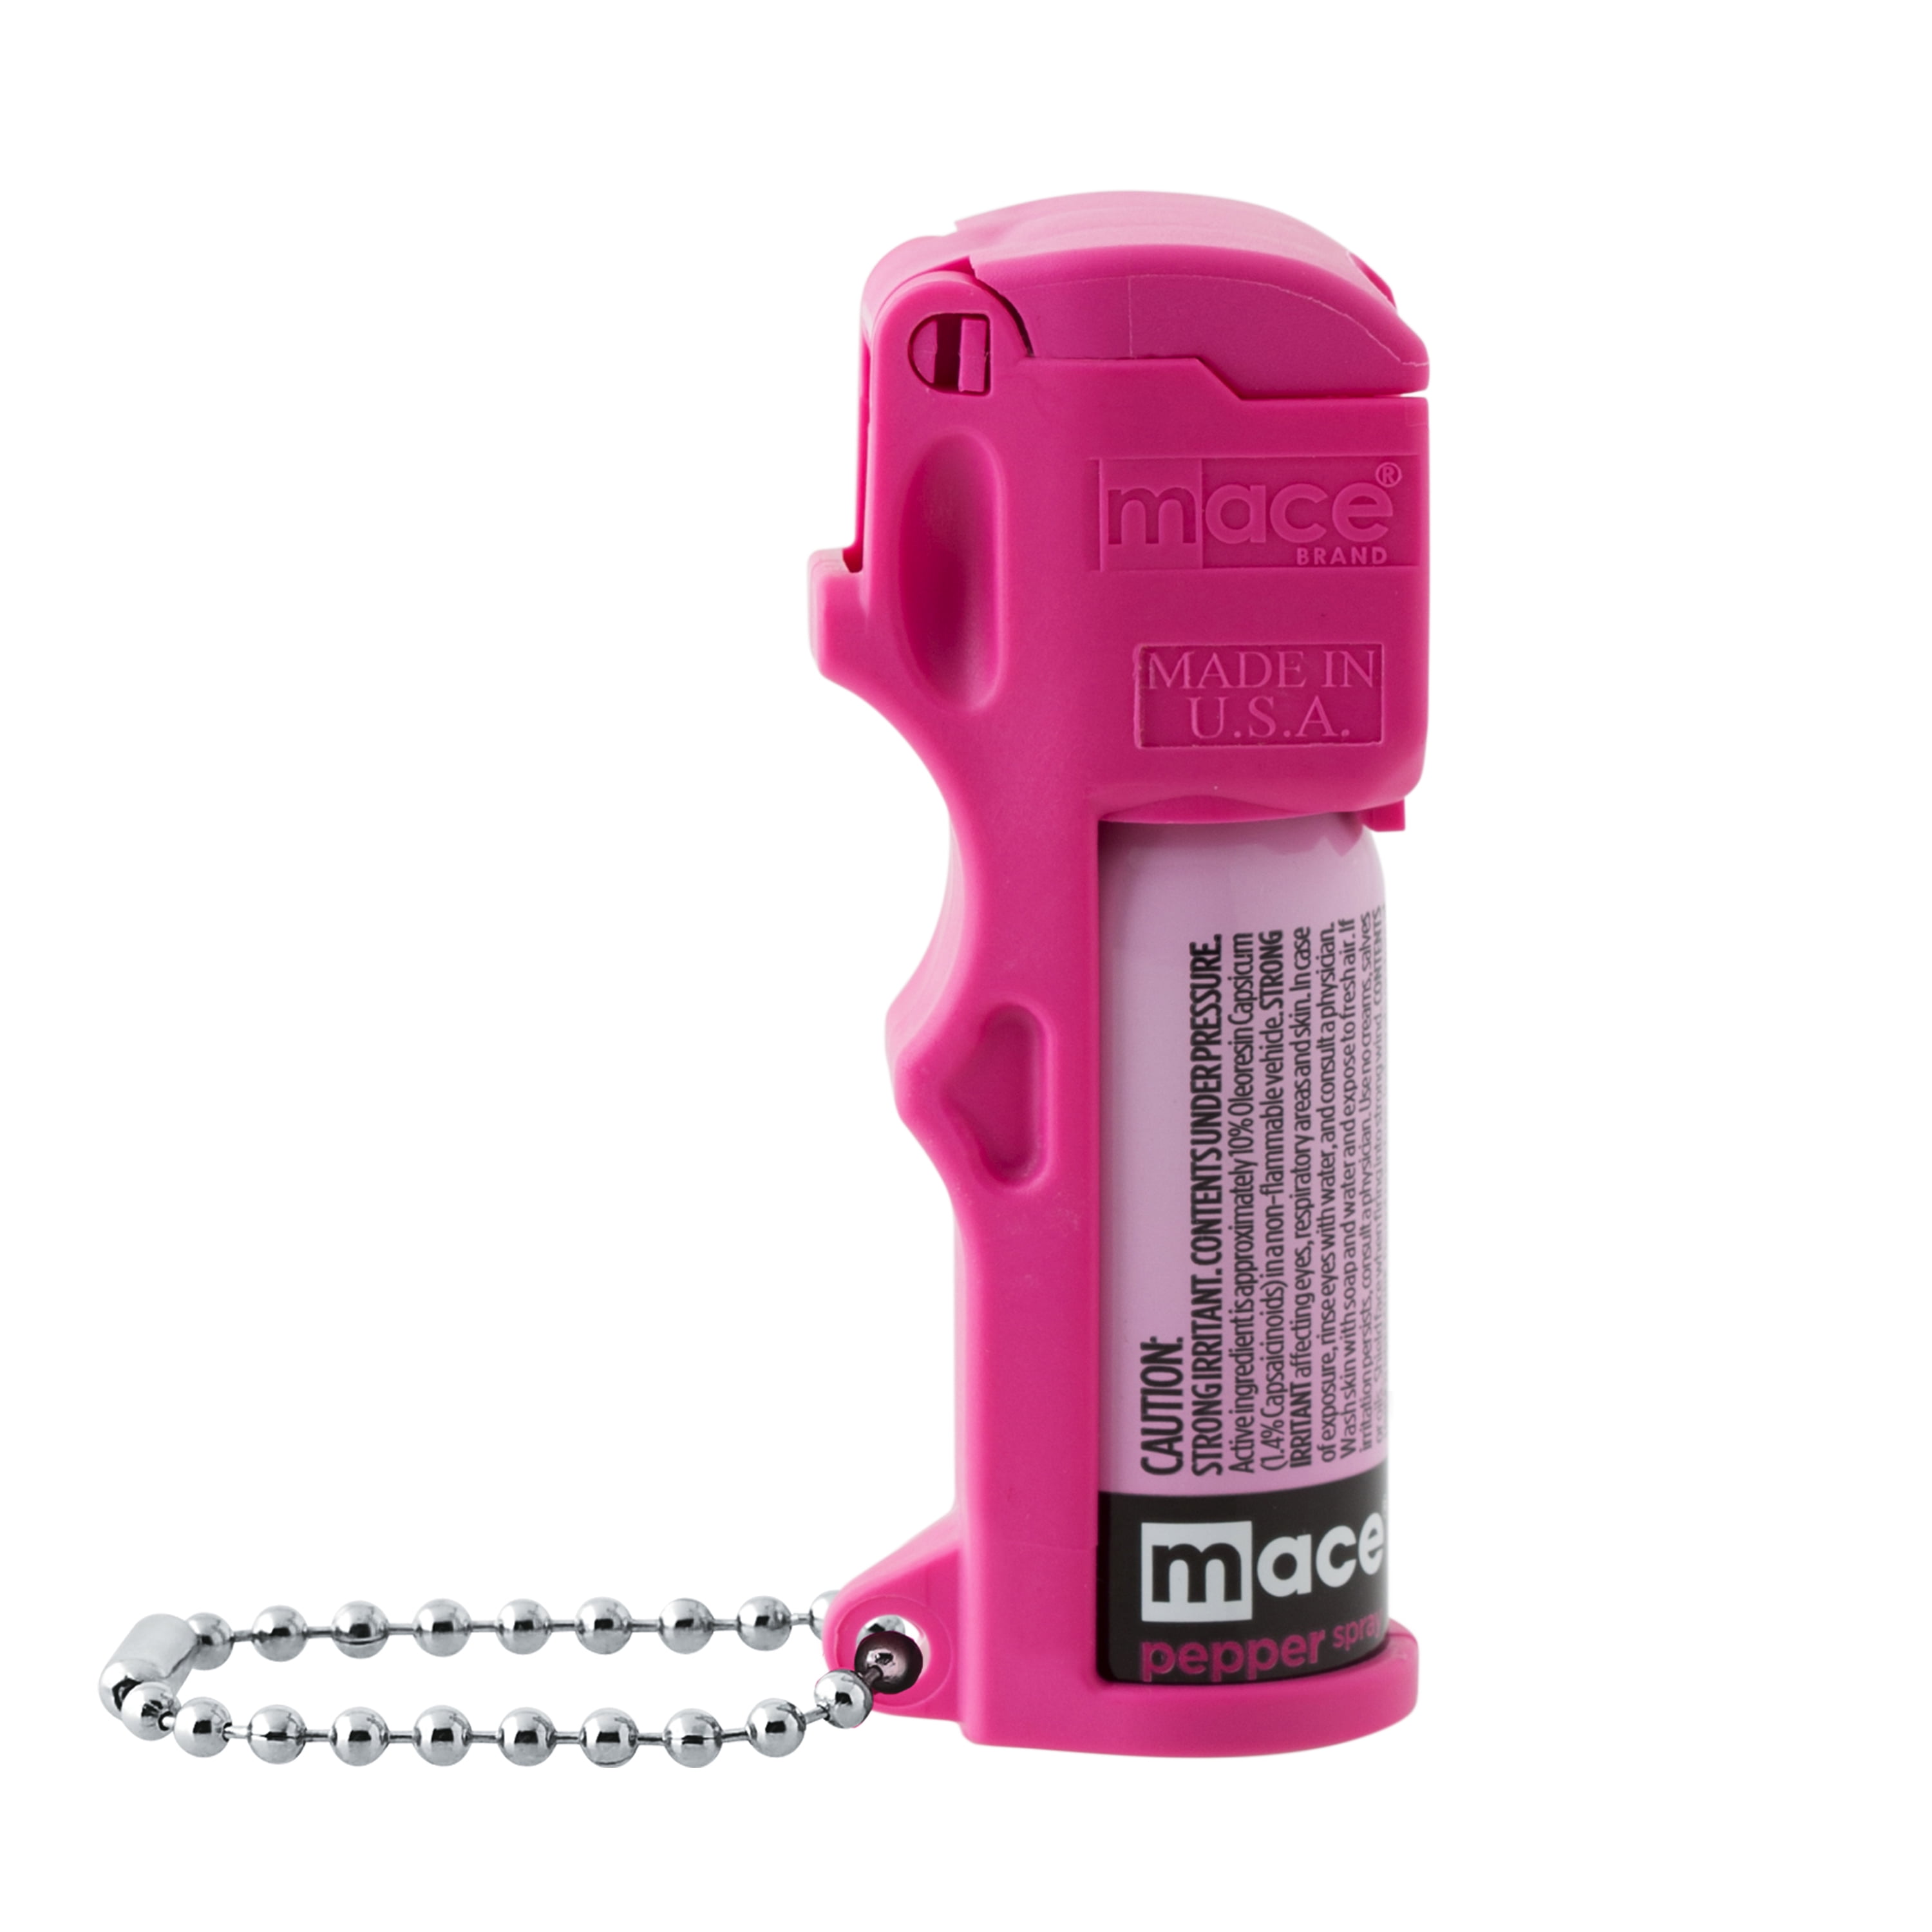 BLINGSTING Essentials Self Defense Keychain Set with Pepper Spray &  Personal Safety Alarm Siren for Women Protection, Pink & Mint 